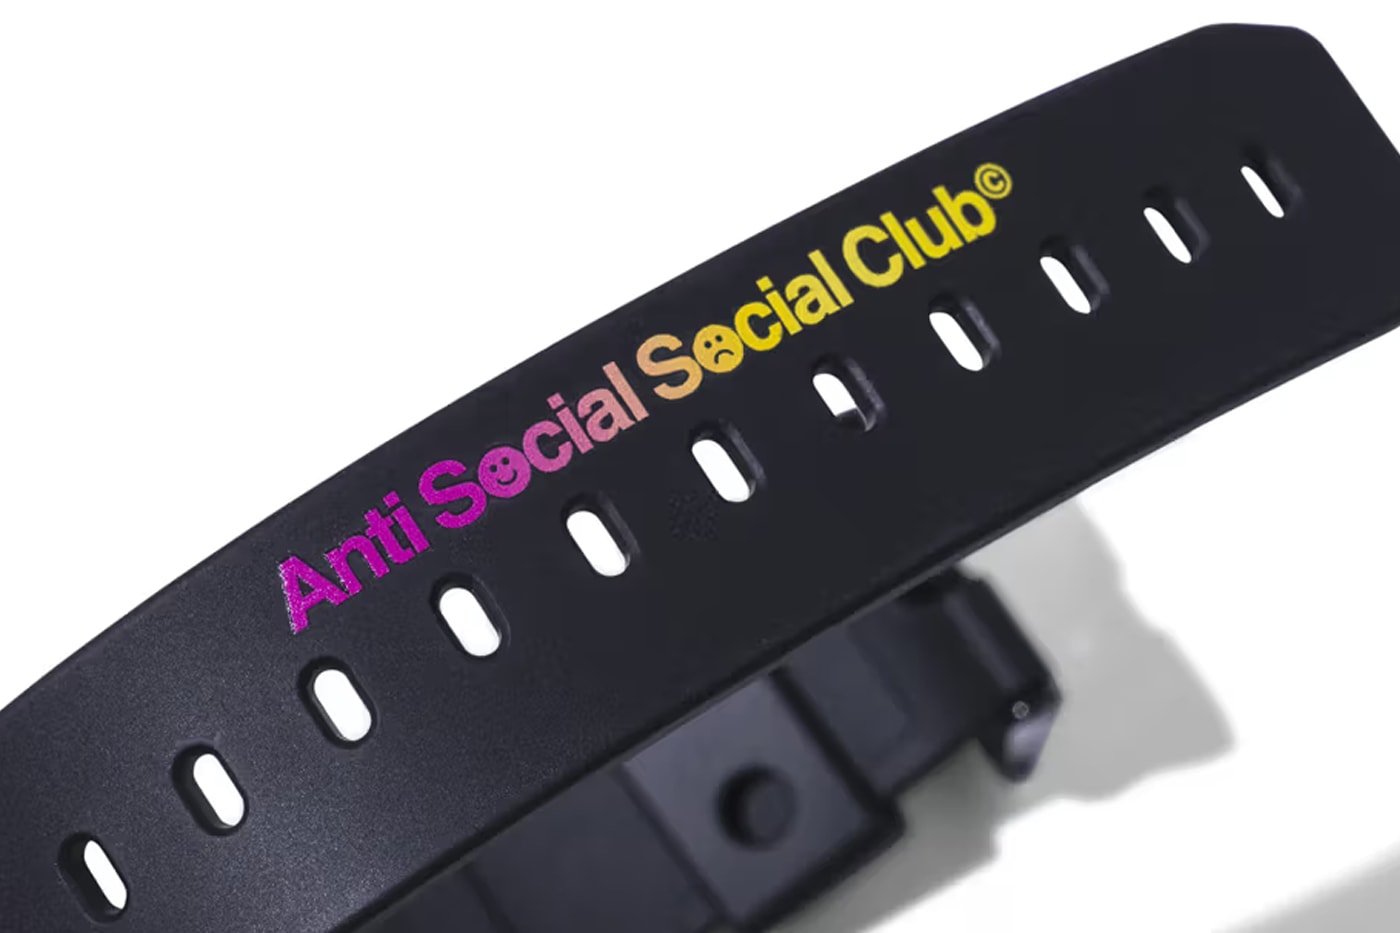 g shock taps anti social social club for casio model watch summer branding trademark pink to yellow gradient time classic timeless collection autumn winter 2023